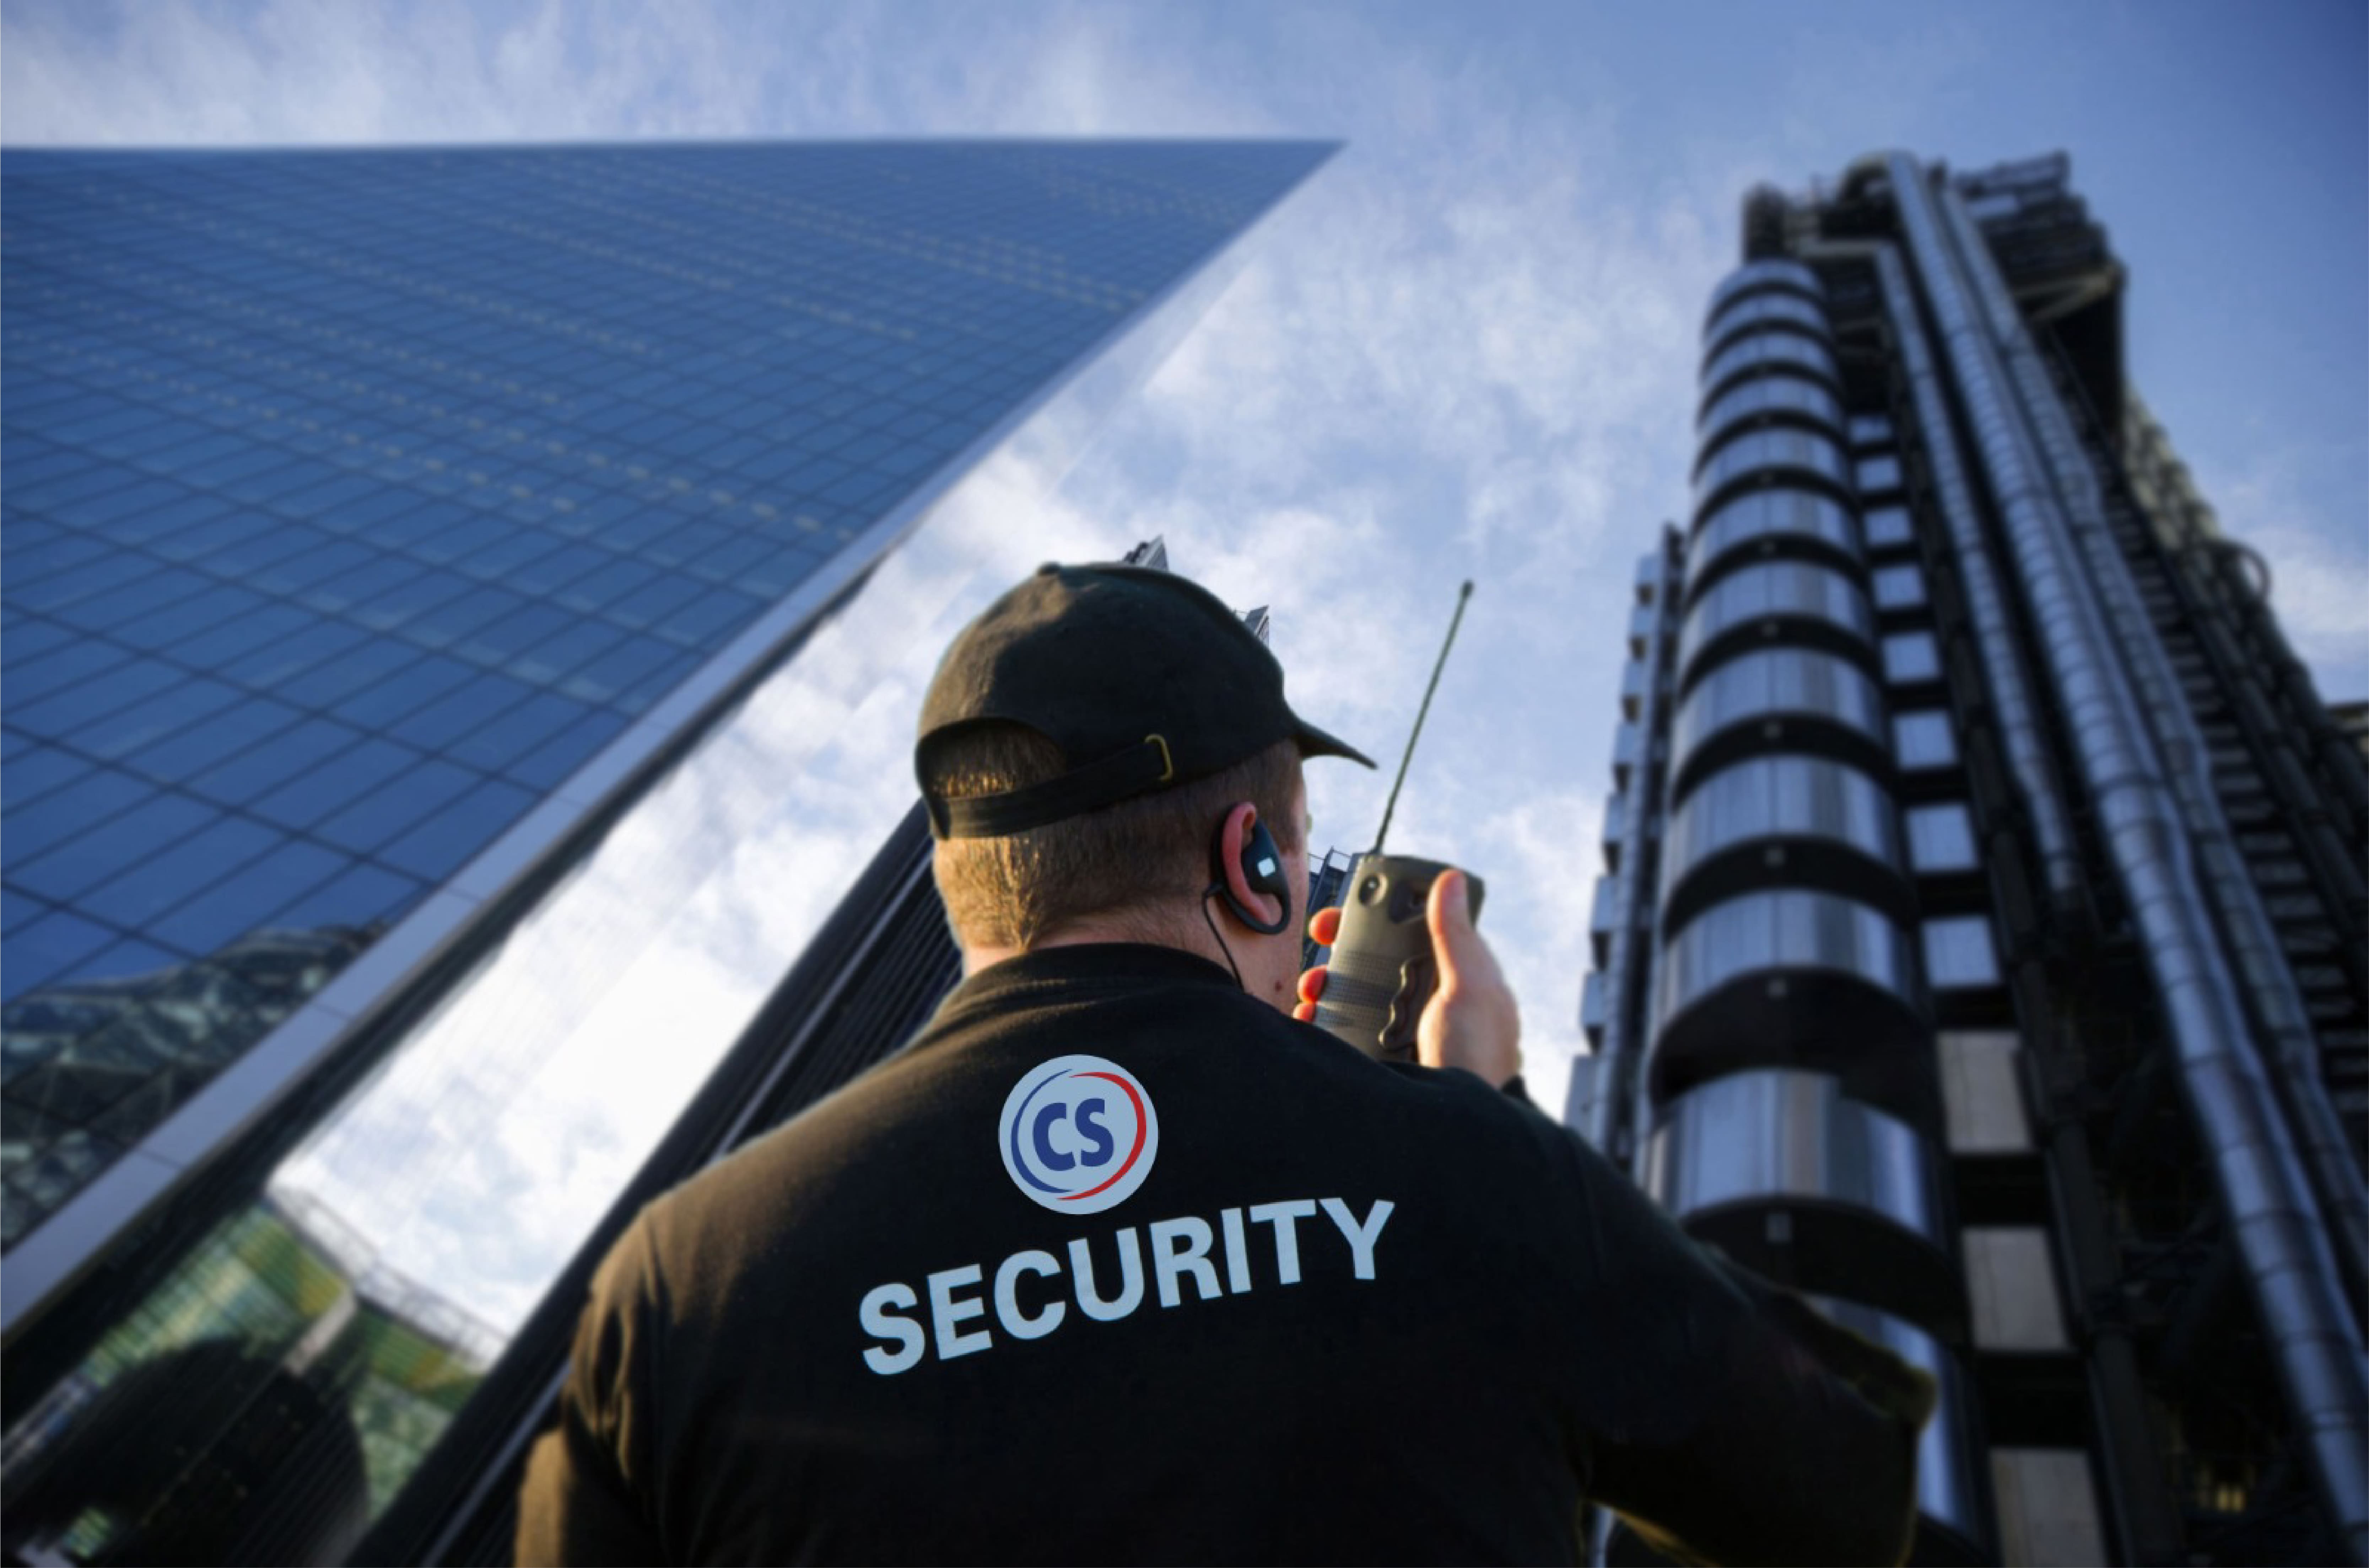 Private Security Services London